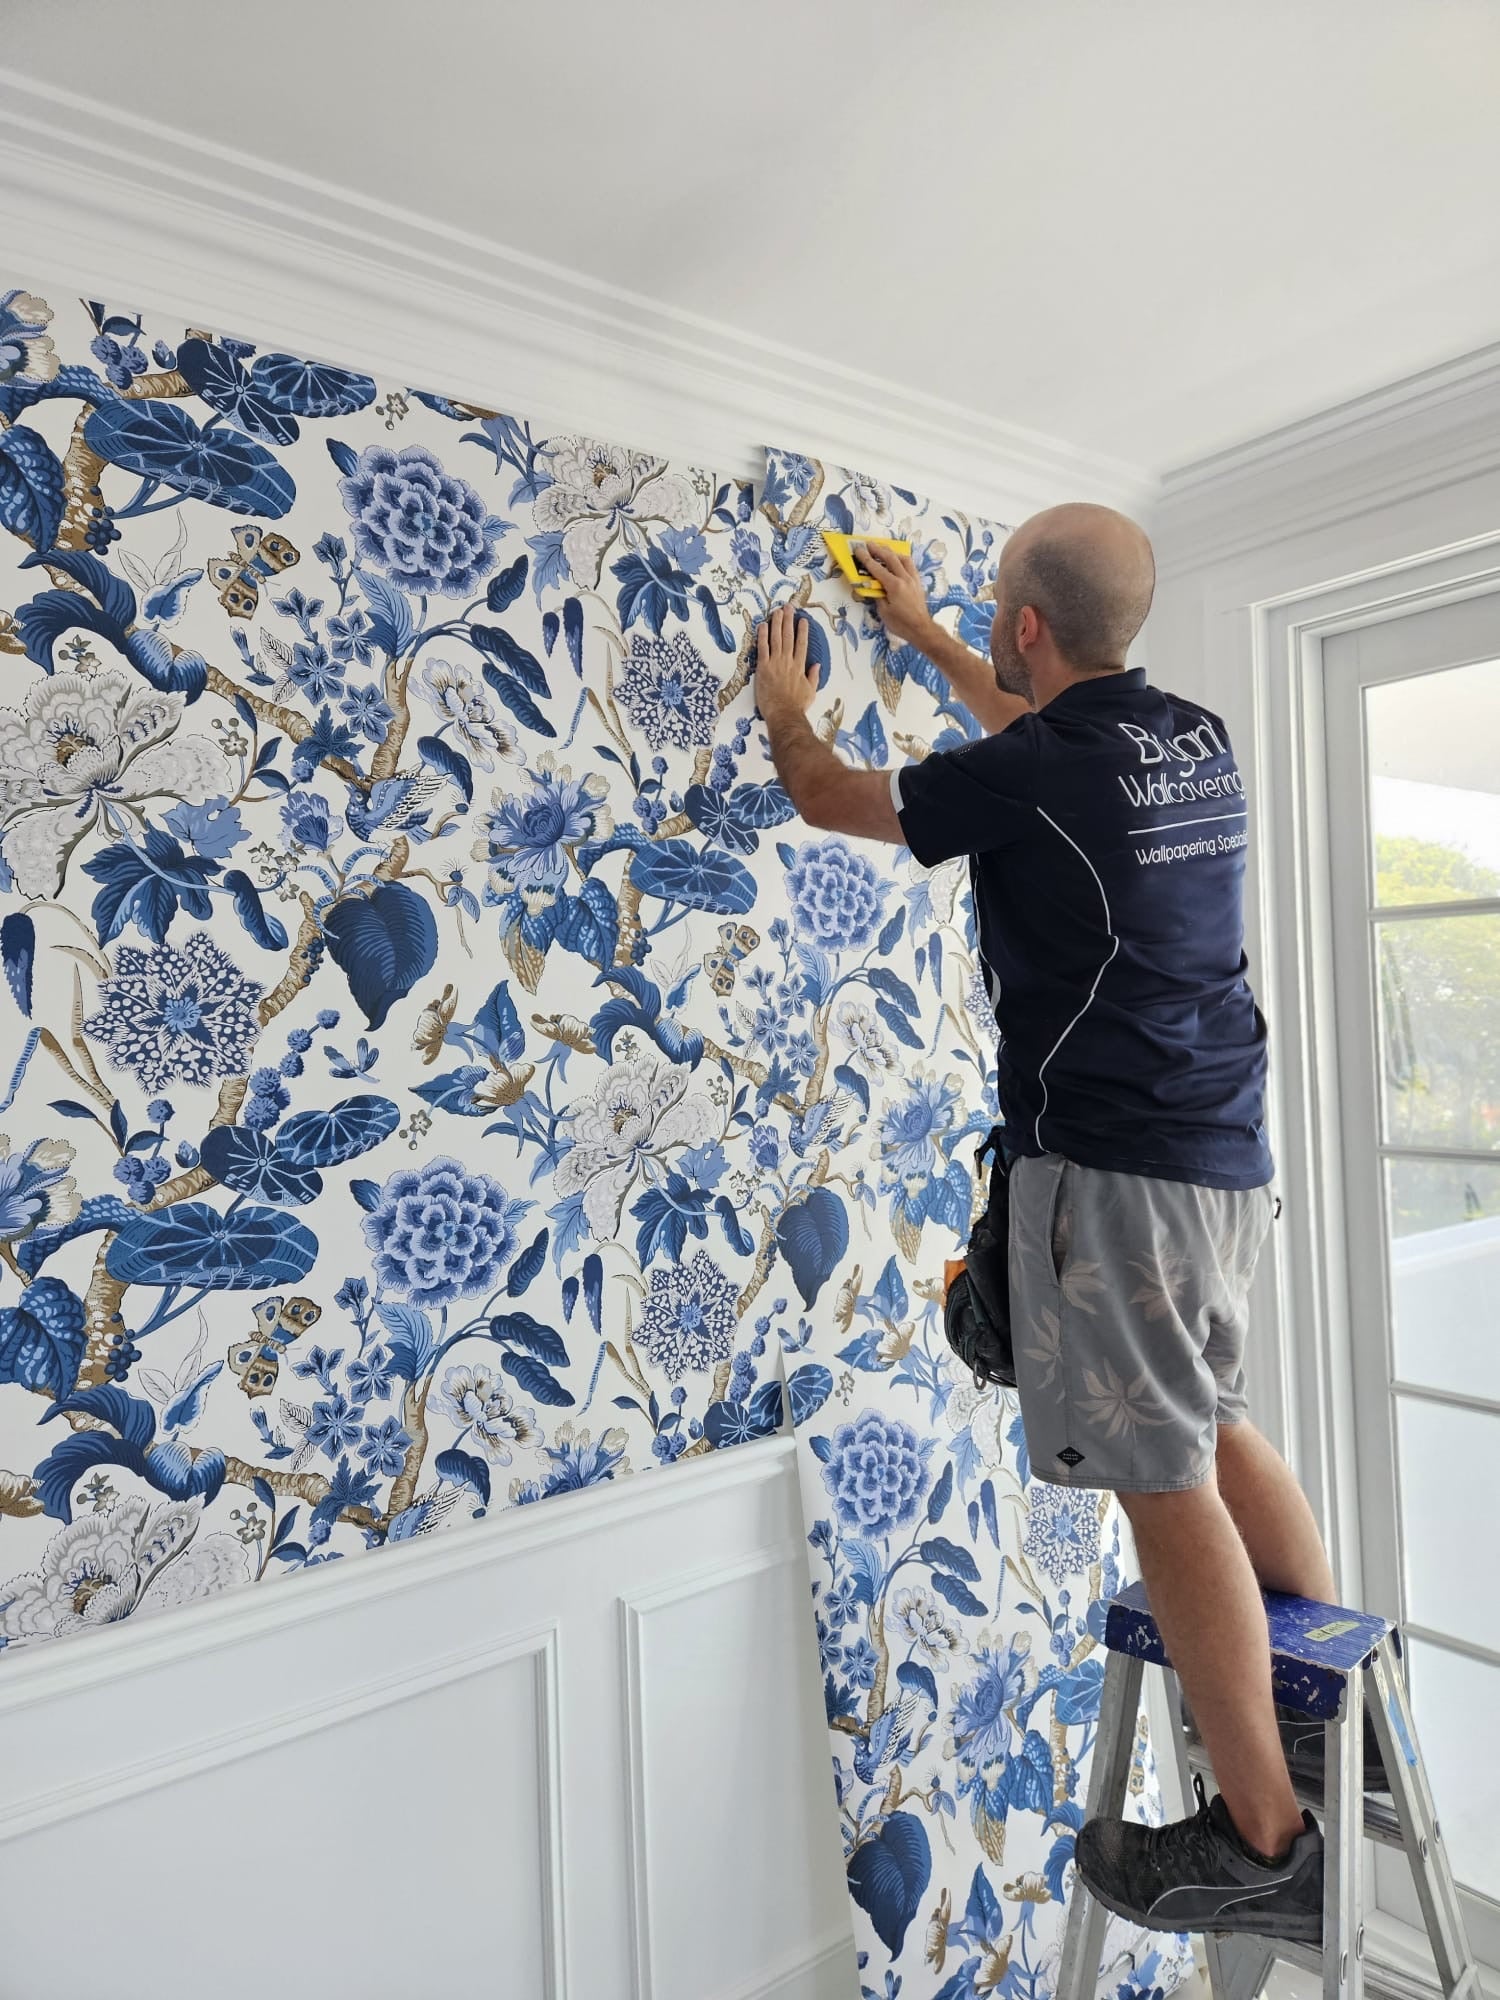 Thinking of wallpapering? Heres a few different ways to help you decide!